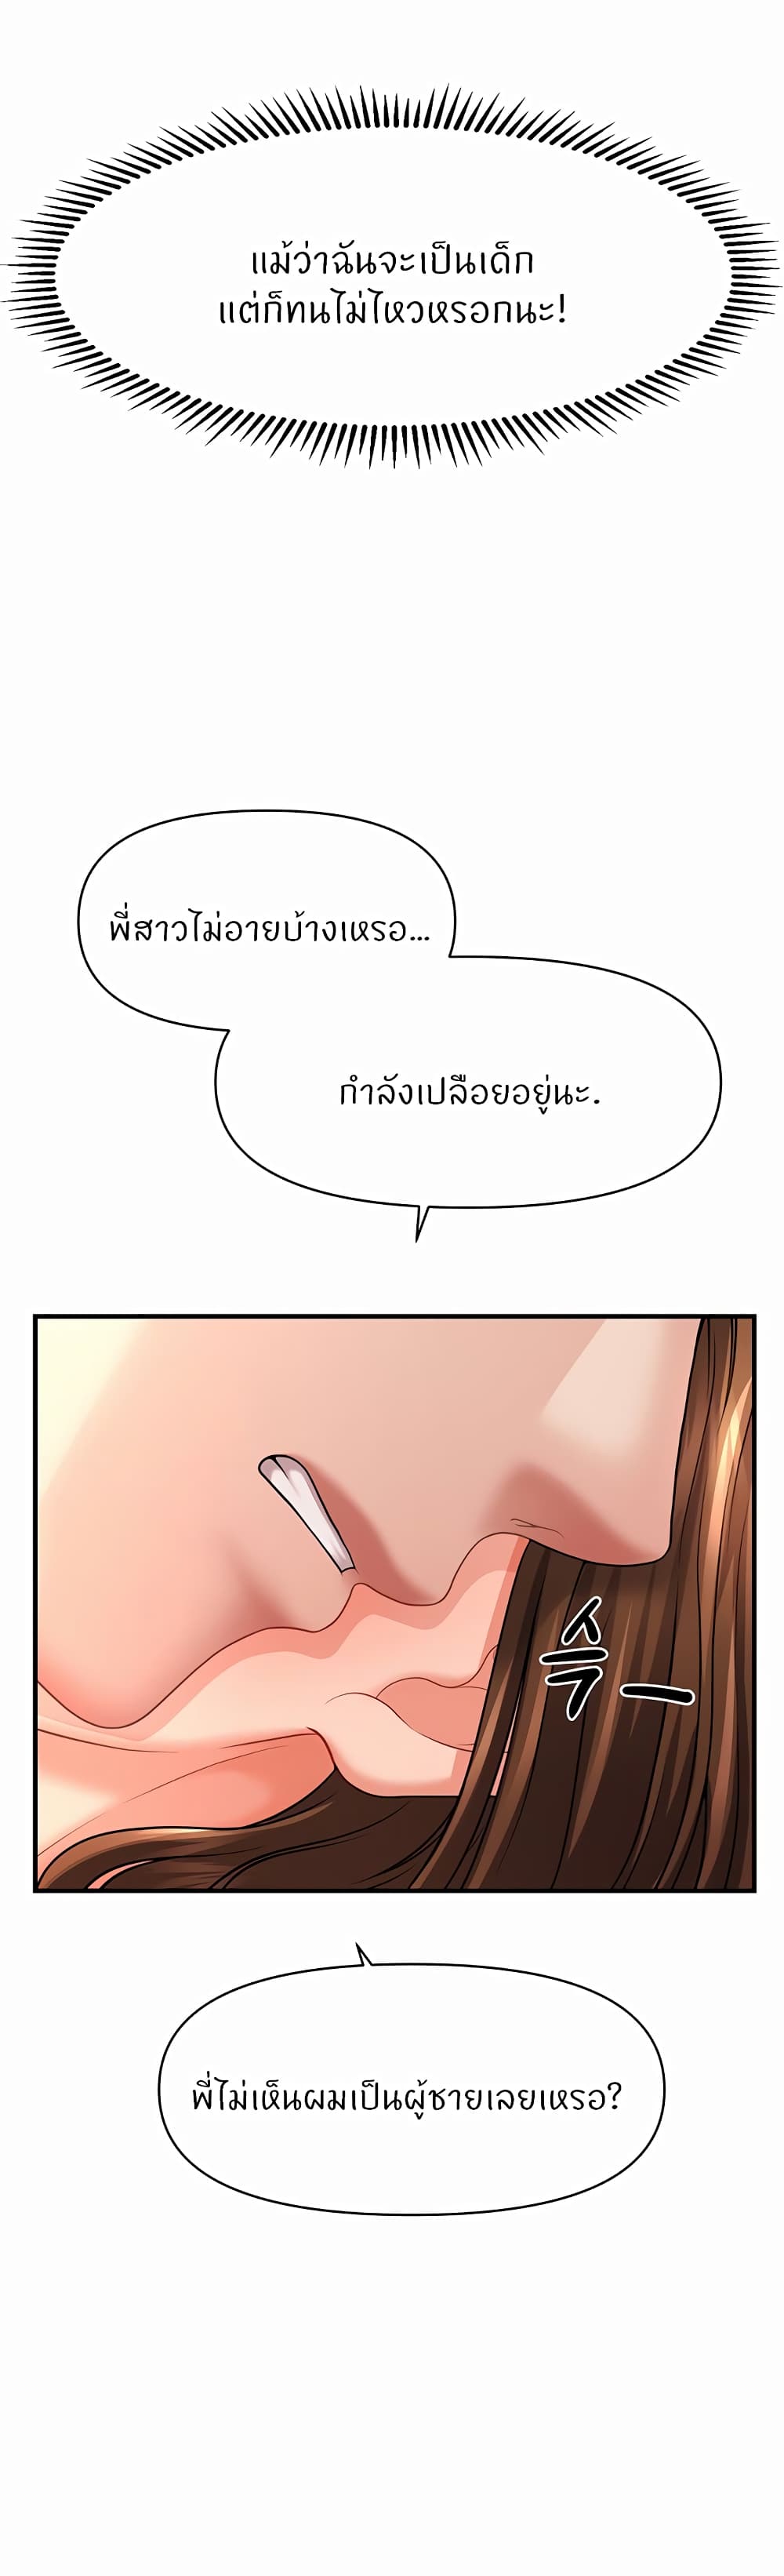 How to Conquer Women with Hypnosis ตอนที่ 2 ภาพ 36